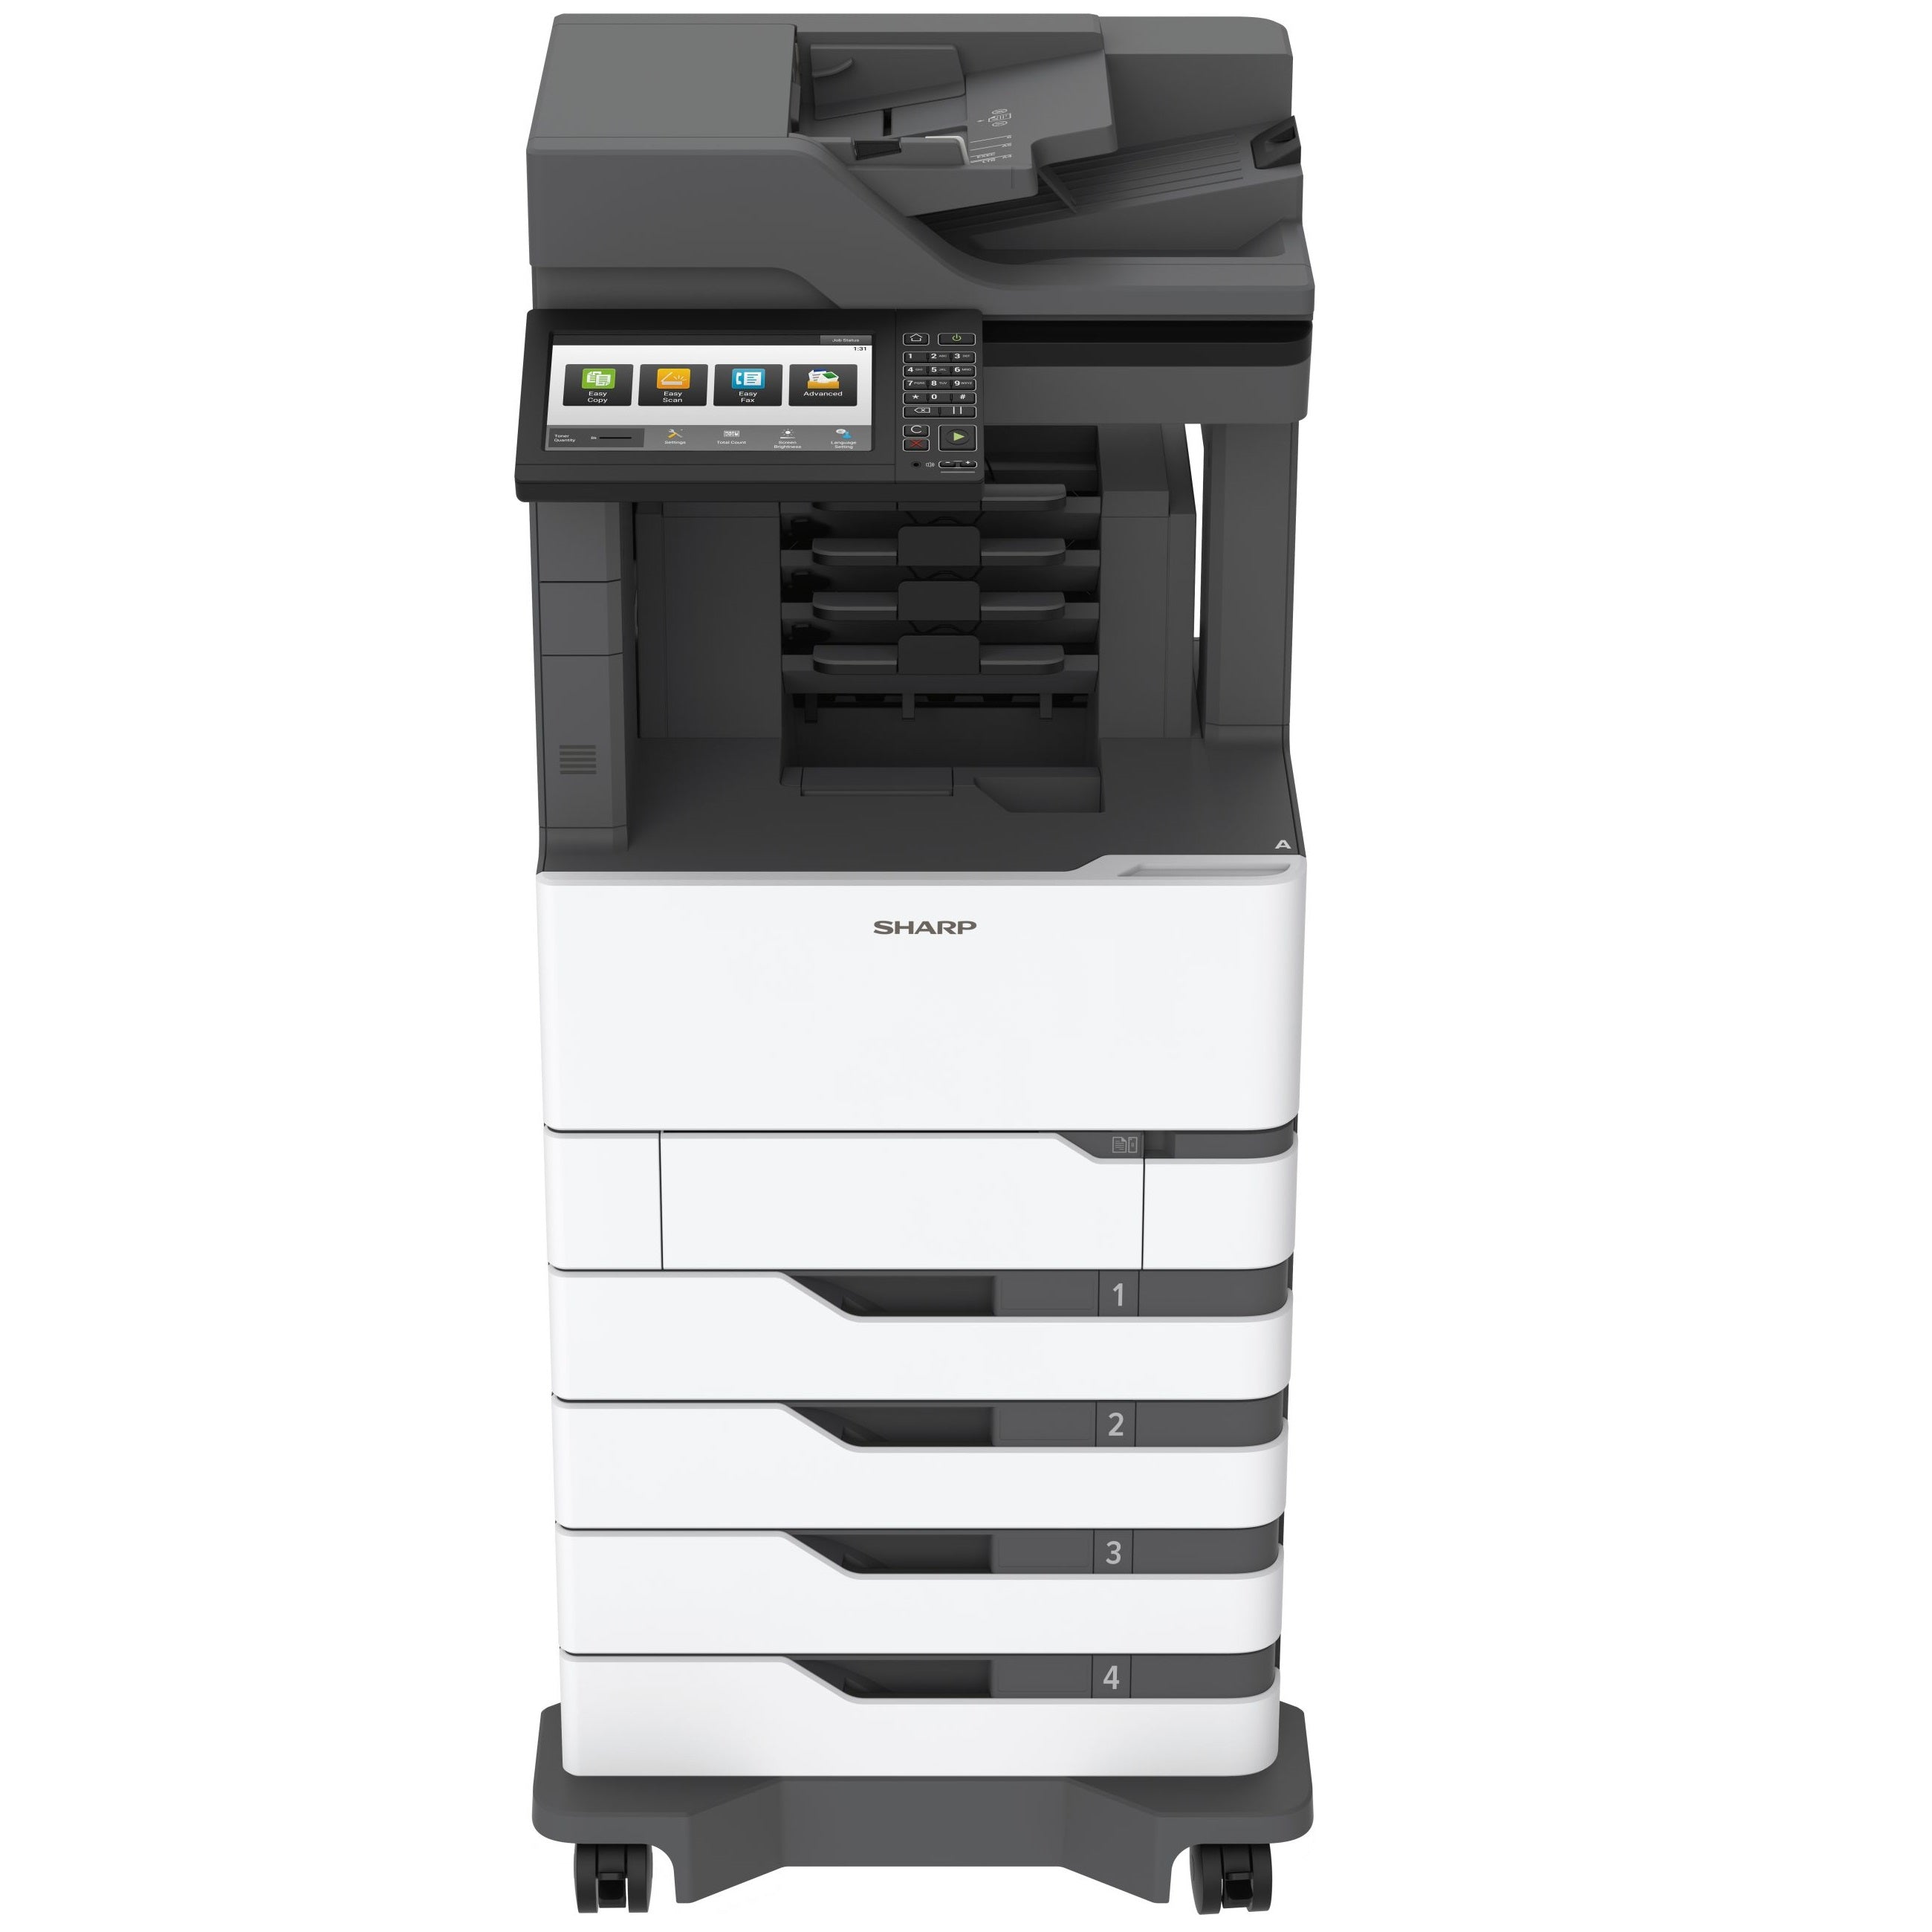 Looking For SHARP MXB557F 55 PPM Desktop Monochrome All-in-One Printer (Copy, Print, Scan, Fax) With Touchscreen Display